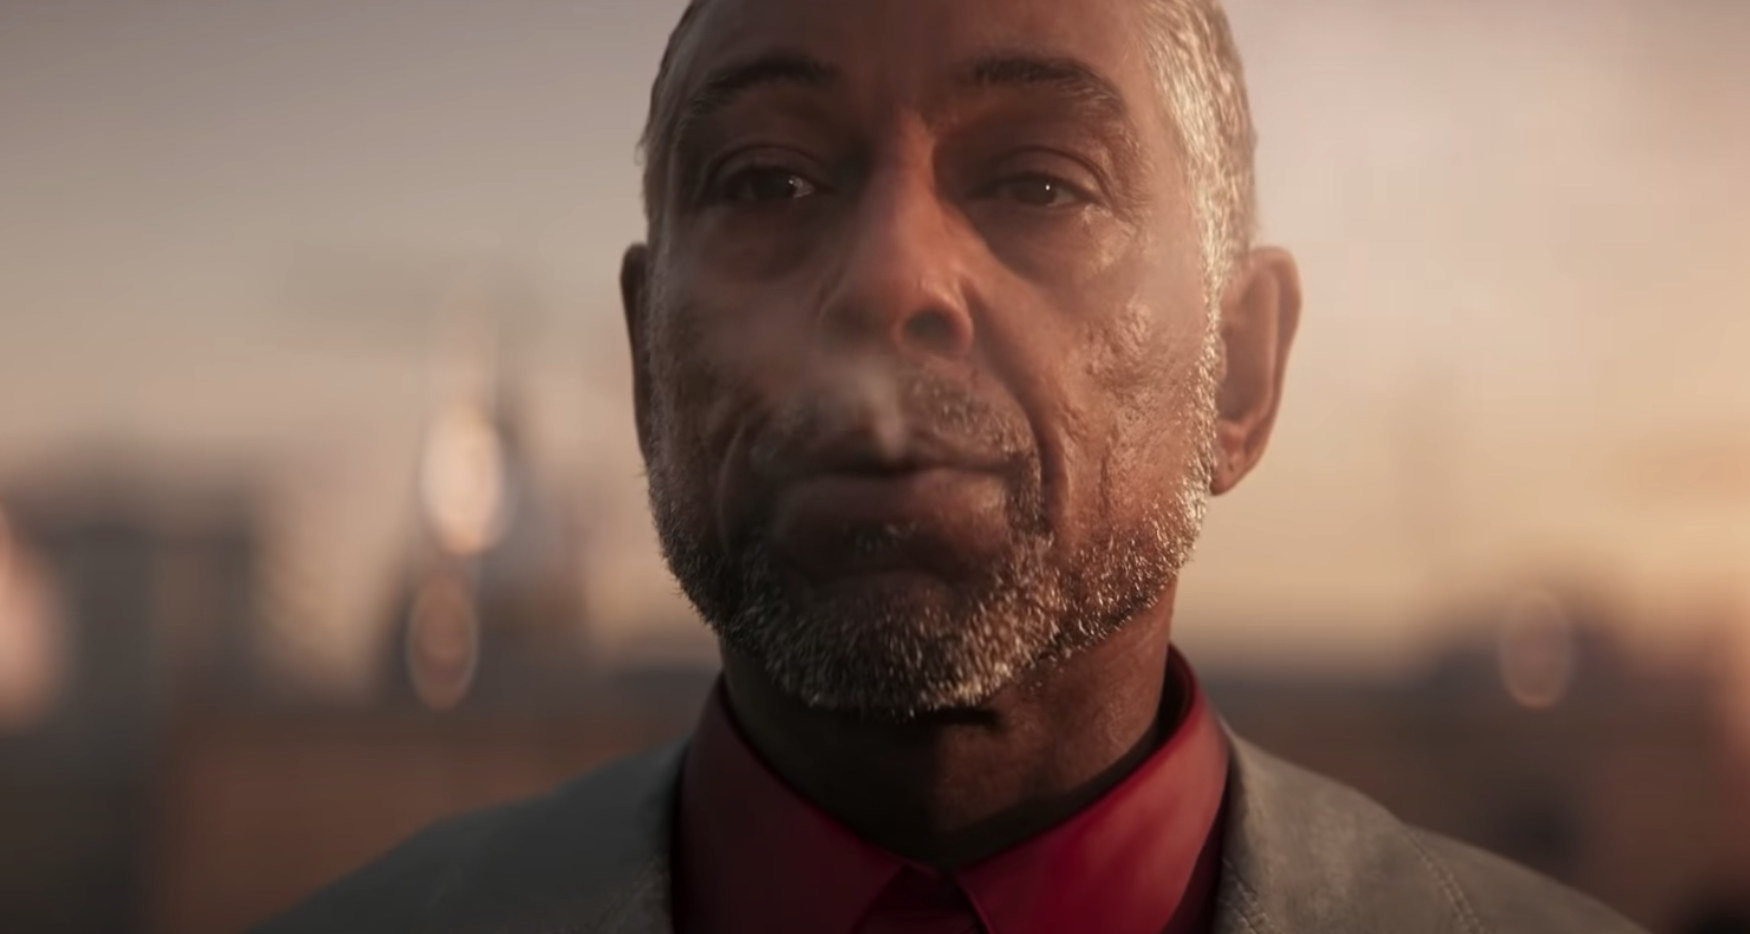 Giancarlo Esposito Is a Dictator in New 'Far Cry 6' Trailer